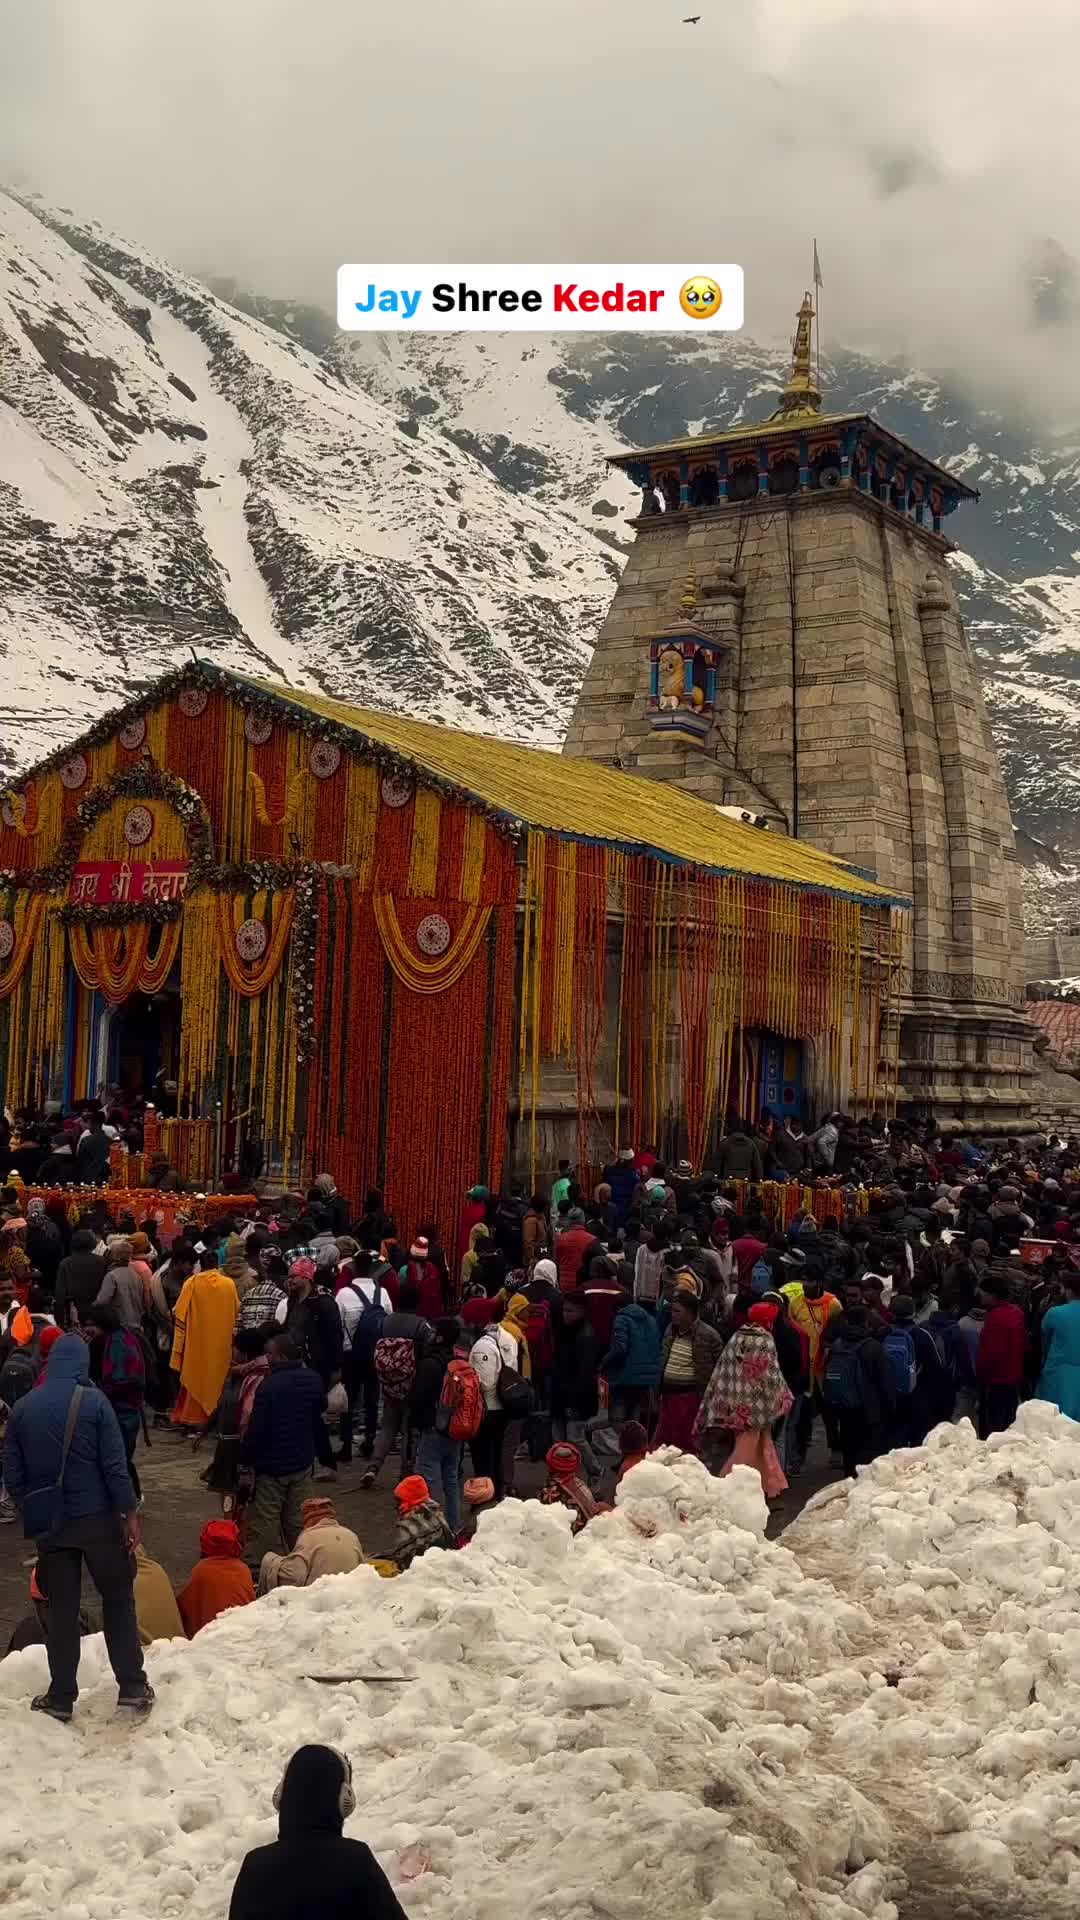 Book Your Kedarnath Darshan for 11th May Now!